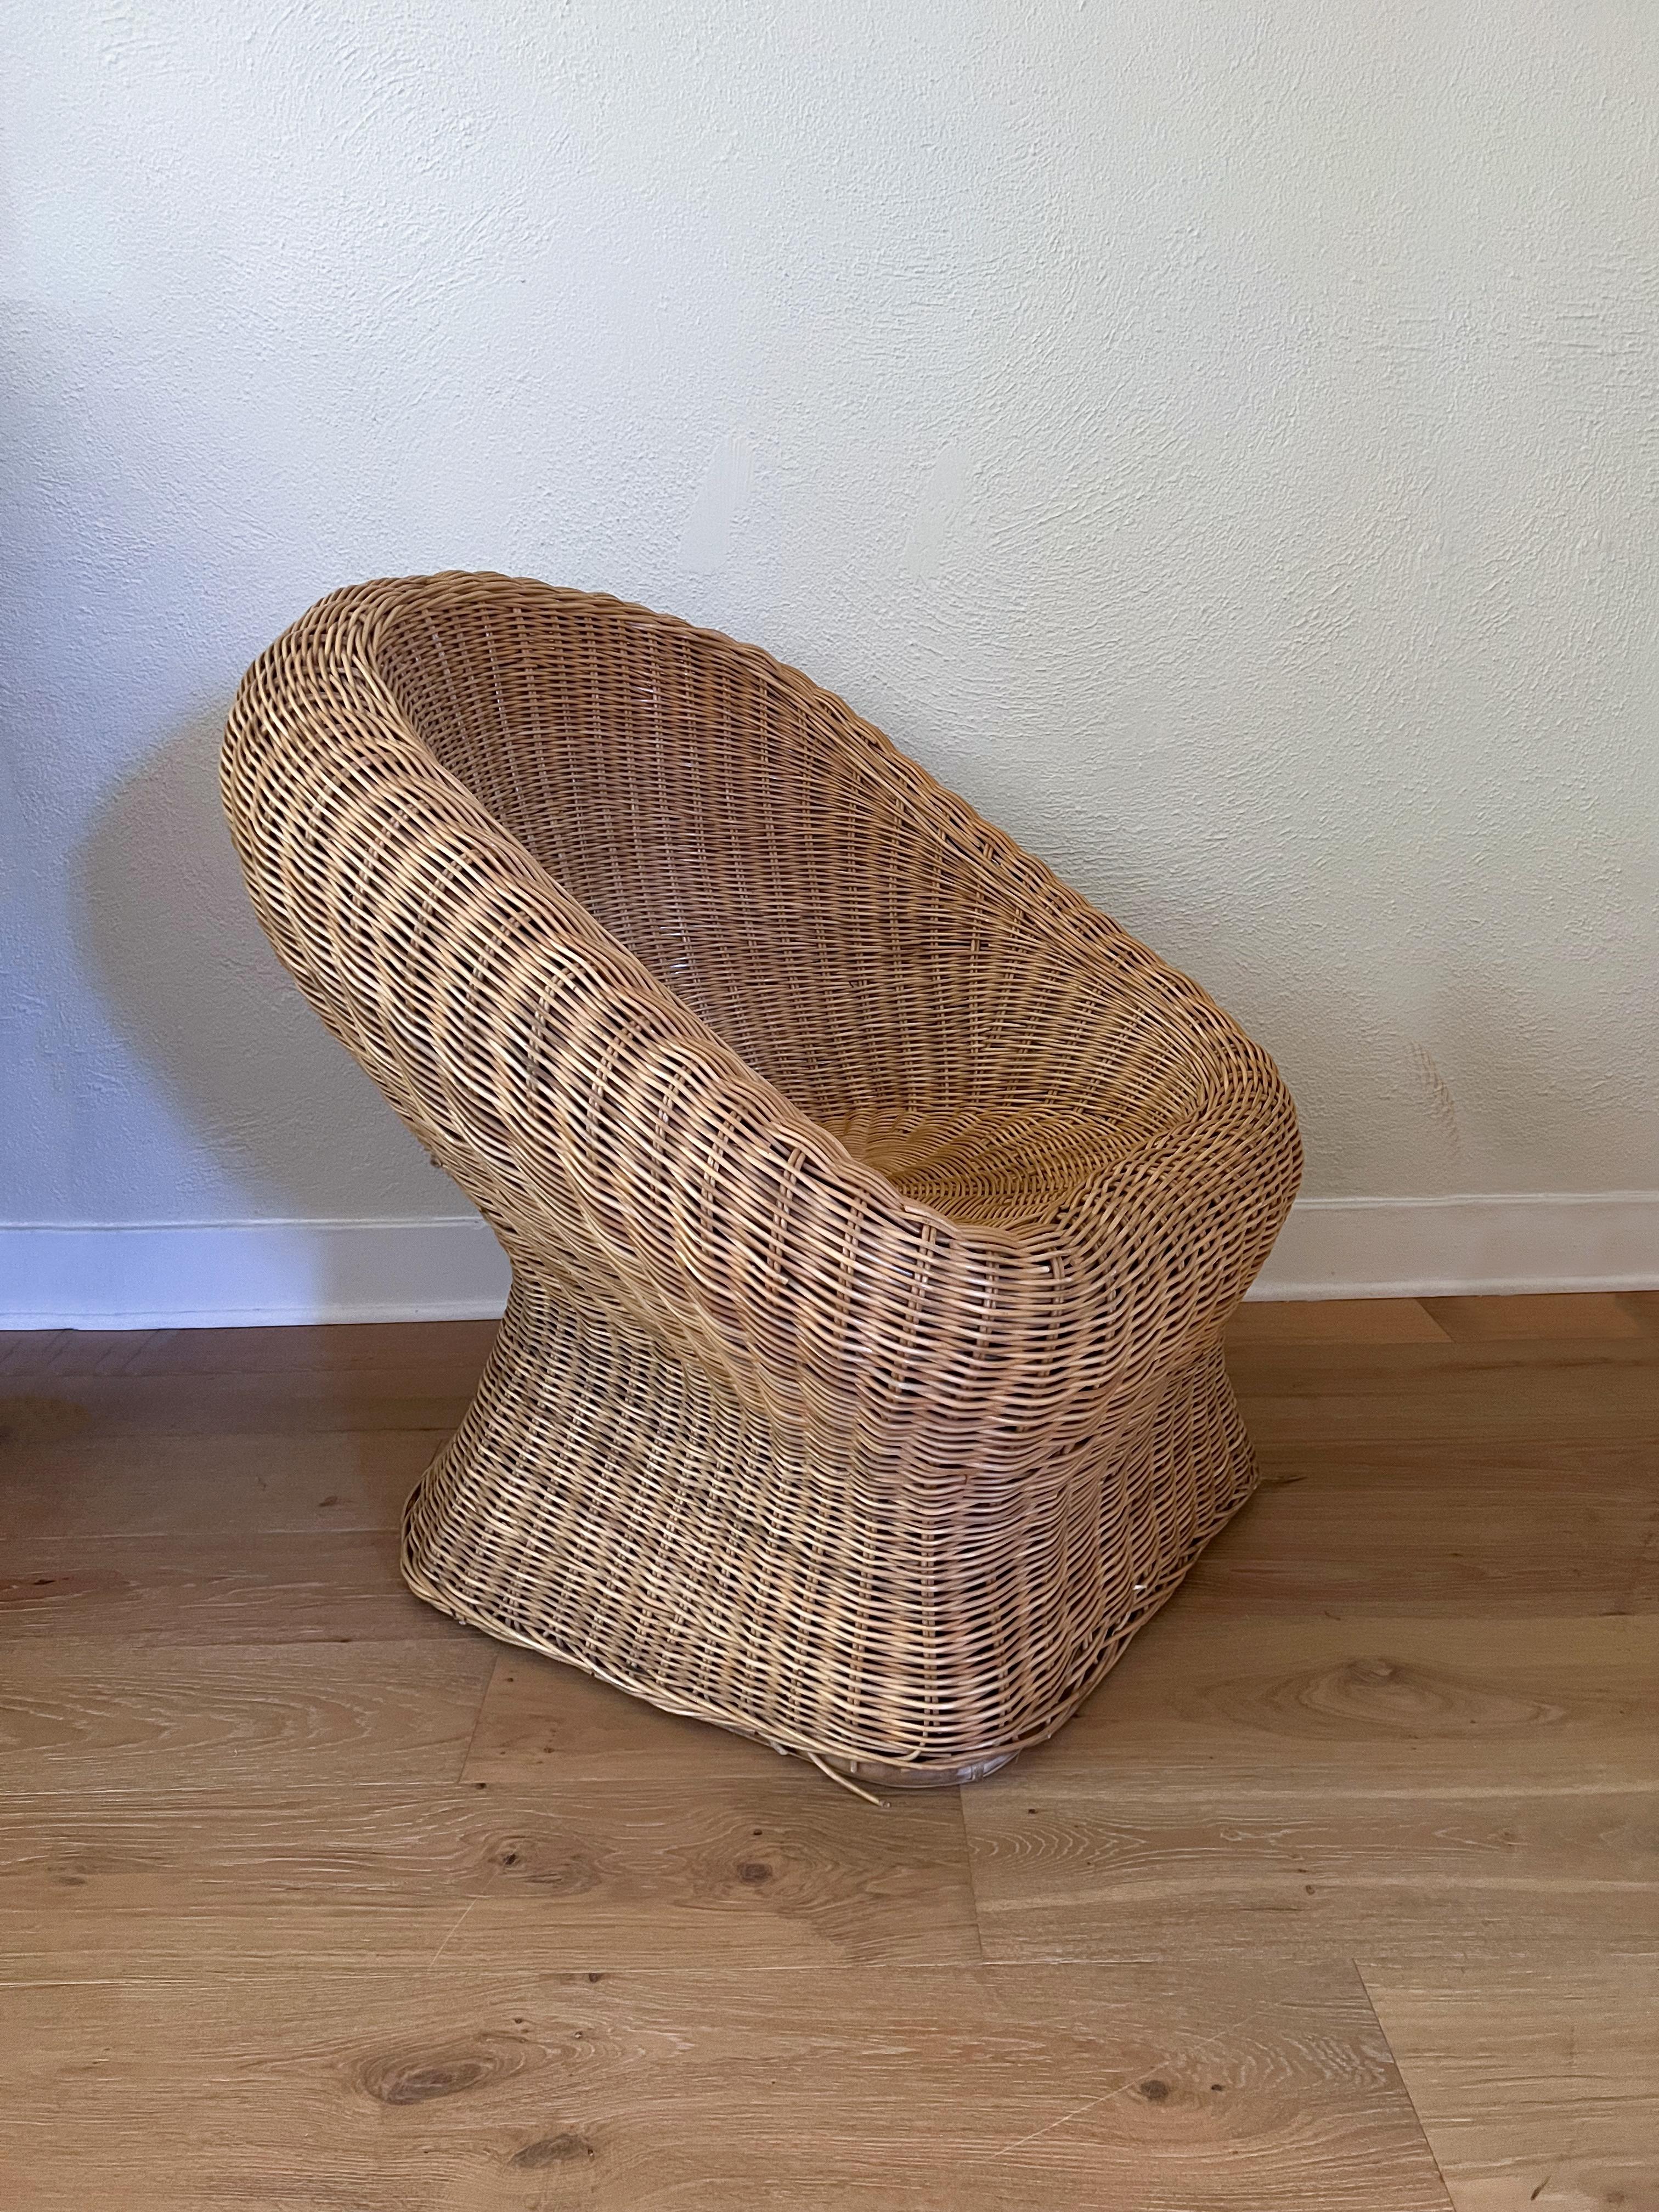 Immerse yourself in the nostalgia of the 1980s with our vintage club lounge chair. With its modern, organic design and fluid egg shape, this piece brings a sense of dynamic style to any room. The chair's intricate construction, crafted from wicker